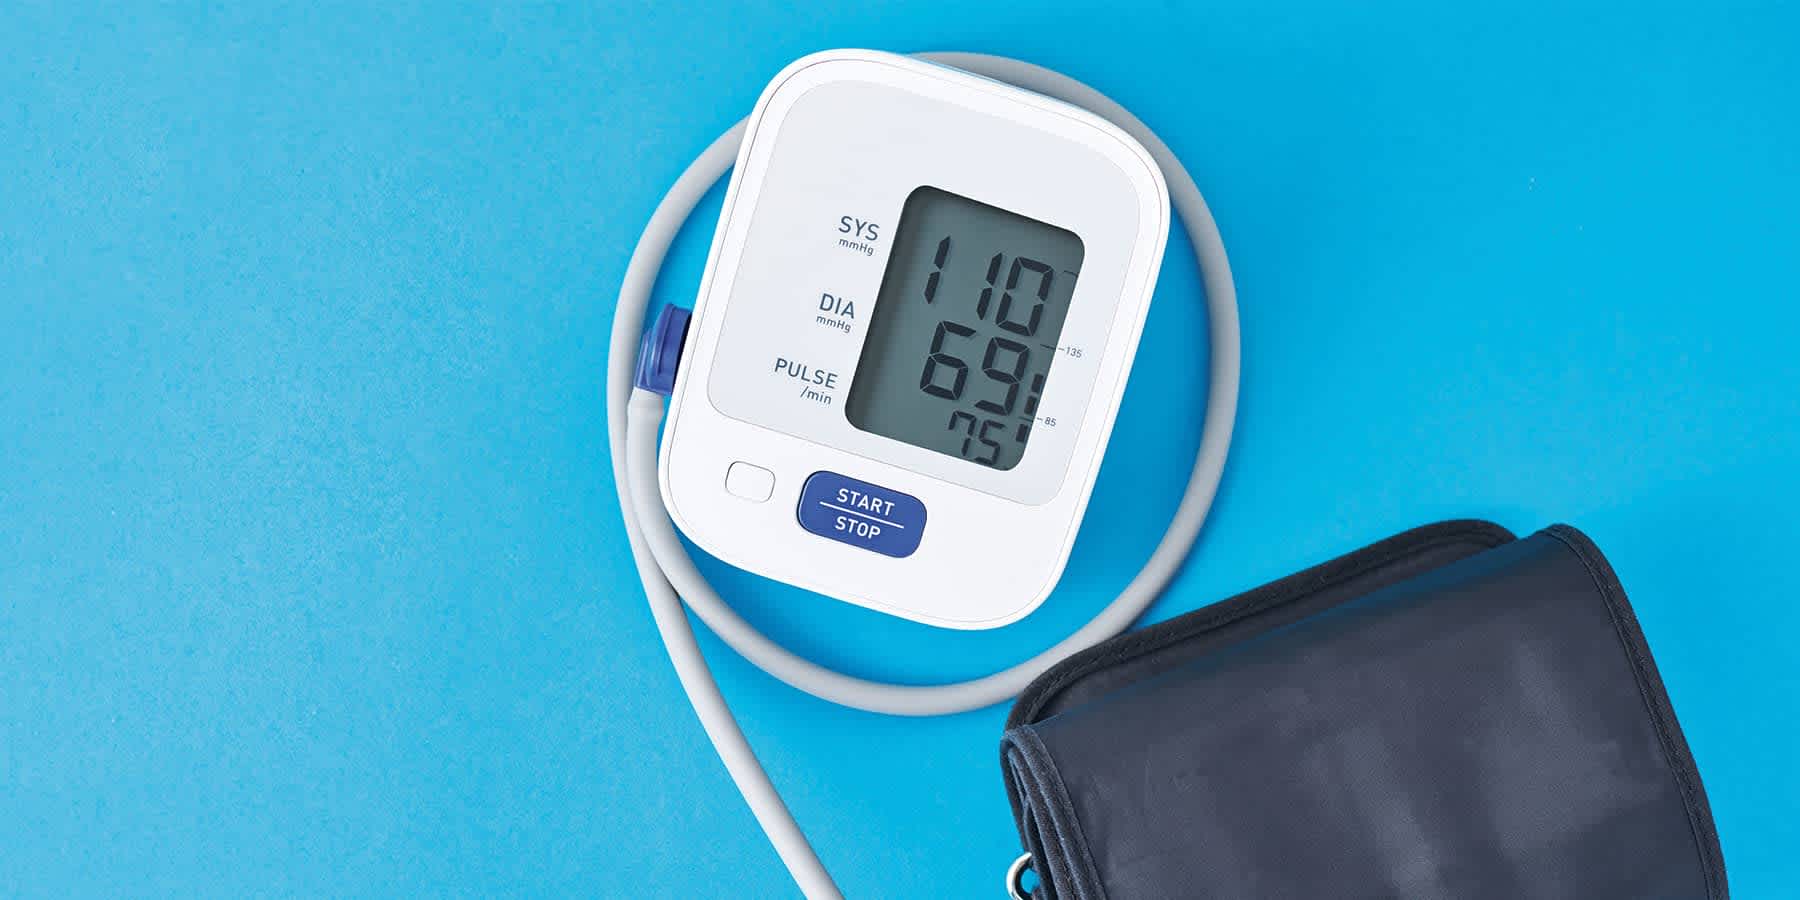 Blood pressure monitor to check in on heart health